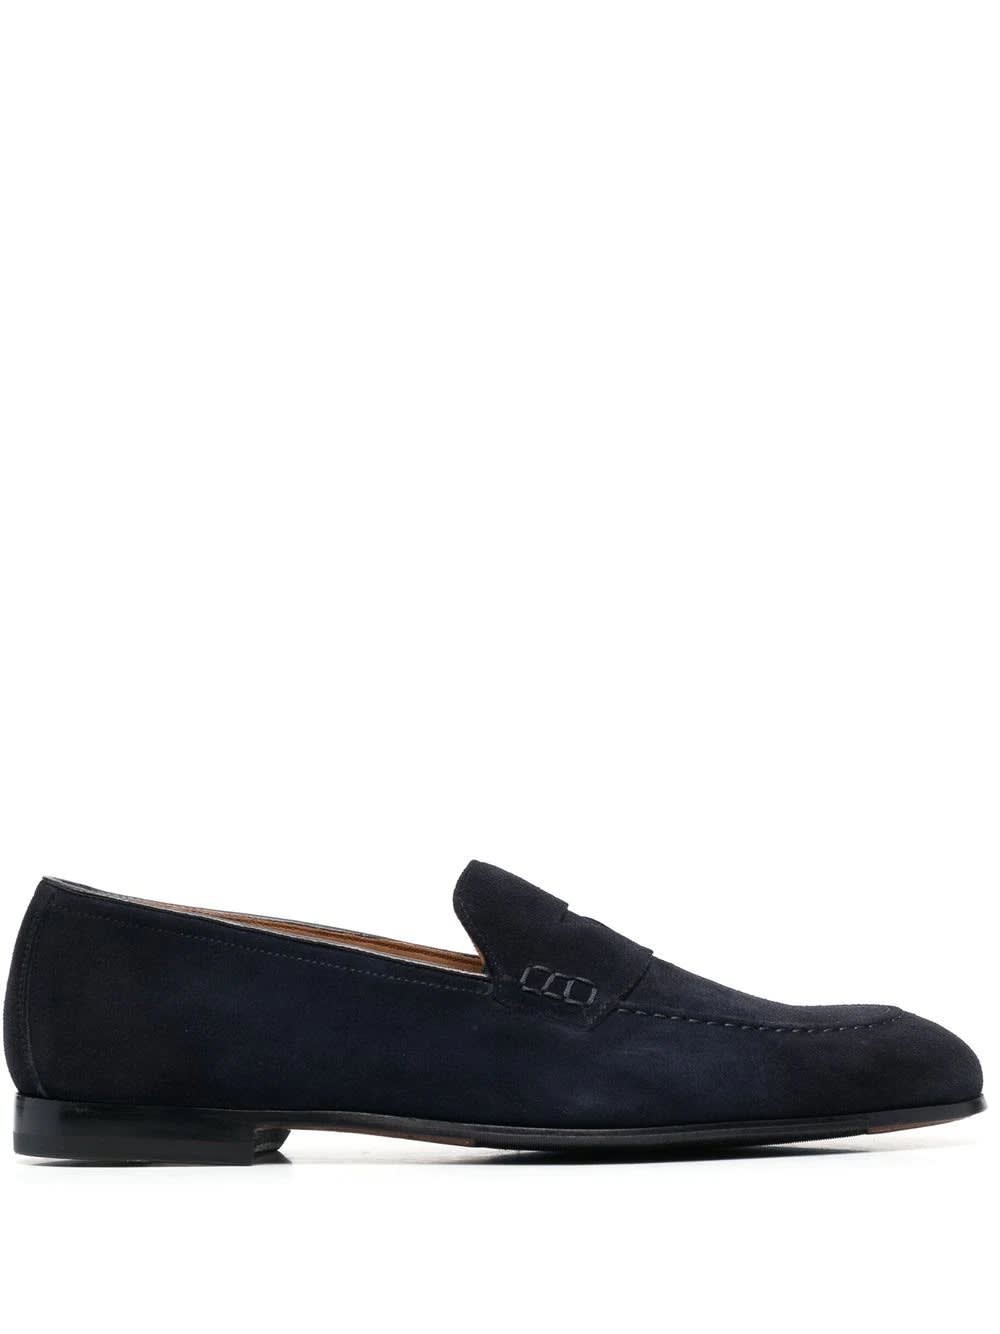 DOUCAL'S LOAFER WITH TASSELS IN DARK BLUE SUEDE